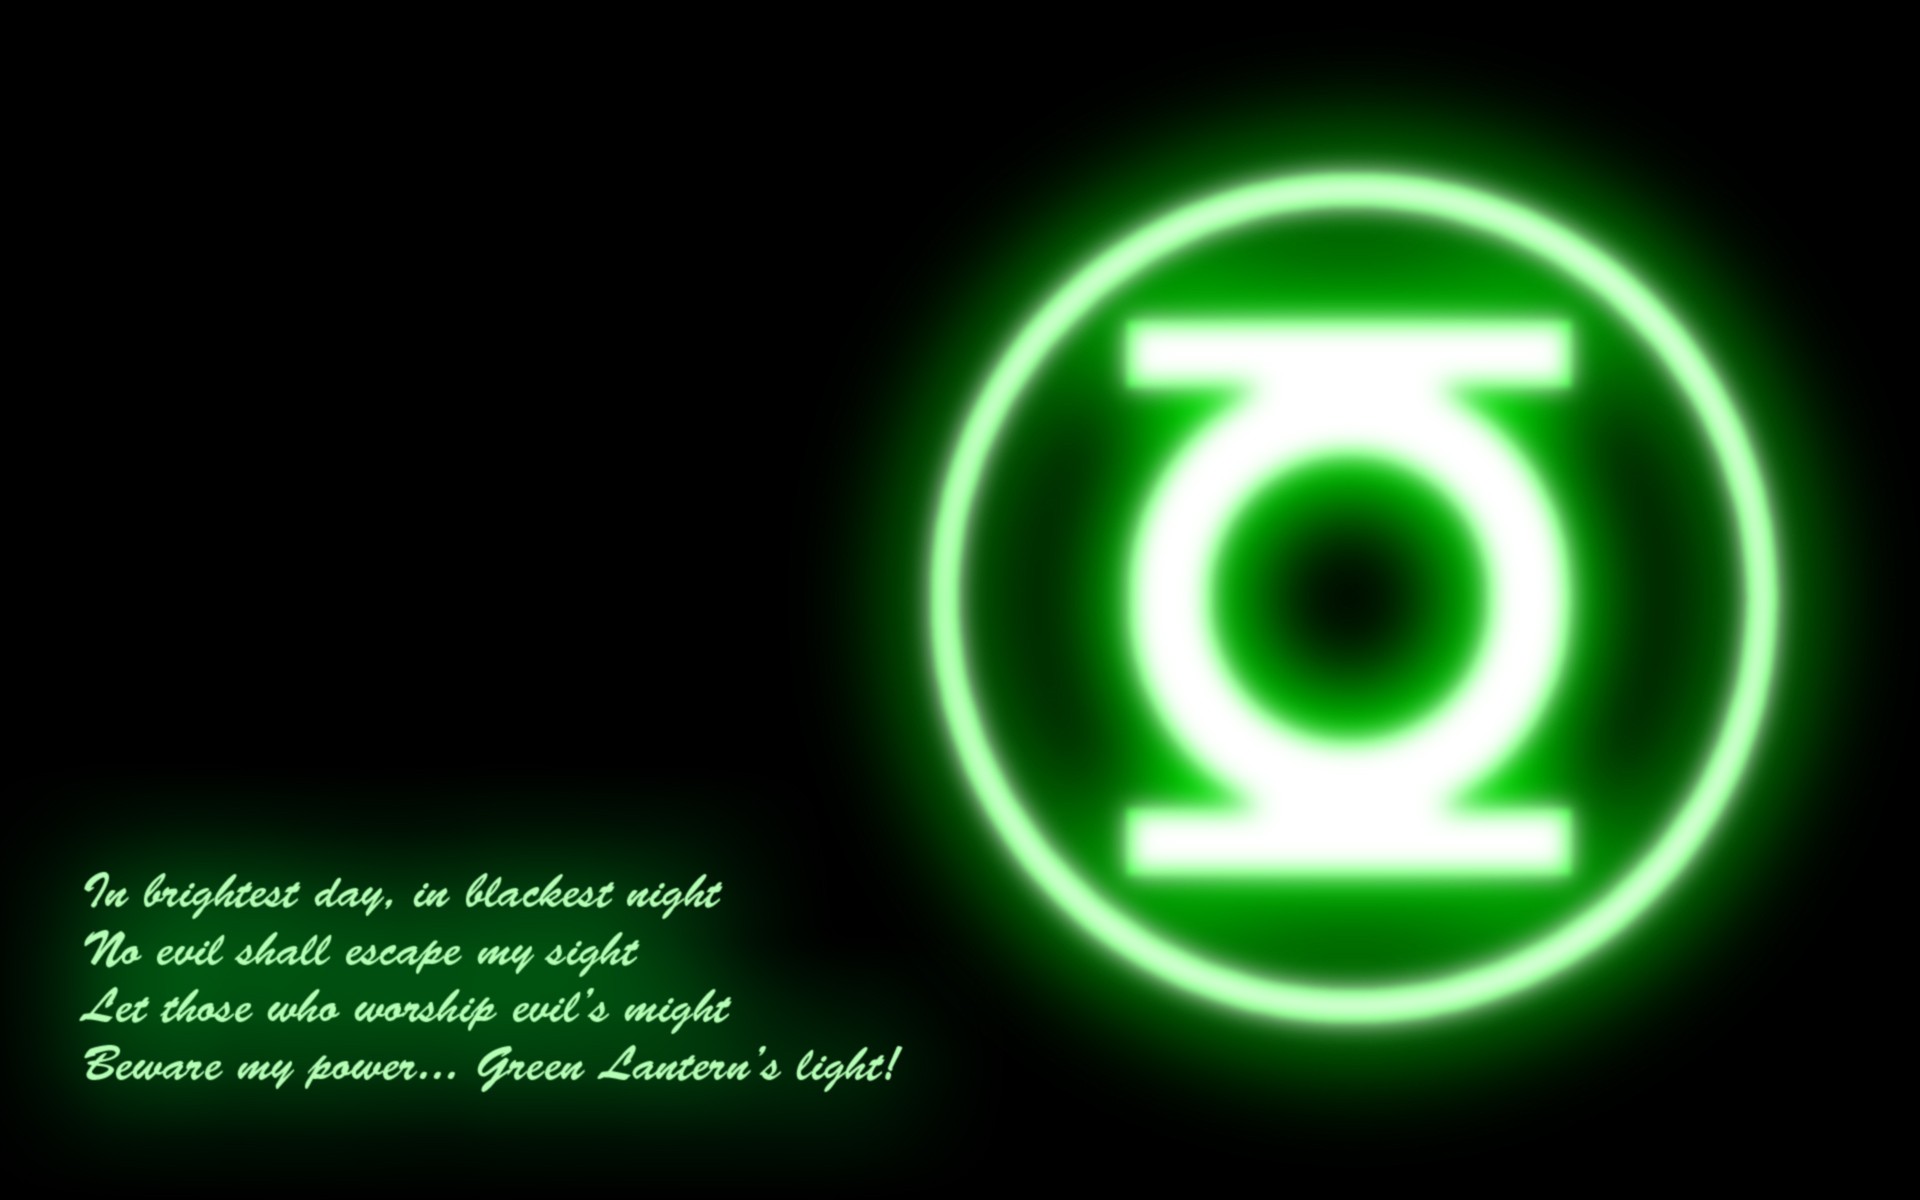 General 1920x1200 quote text Green Lantern simple background